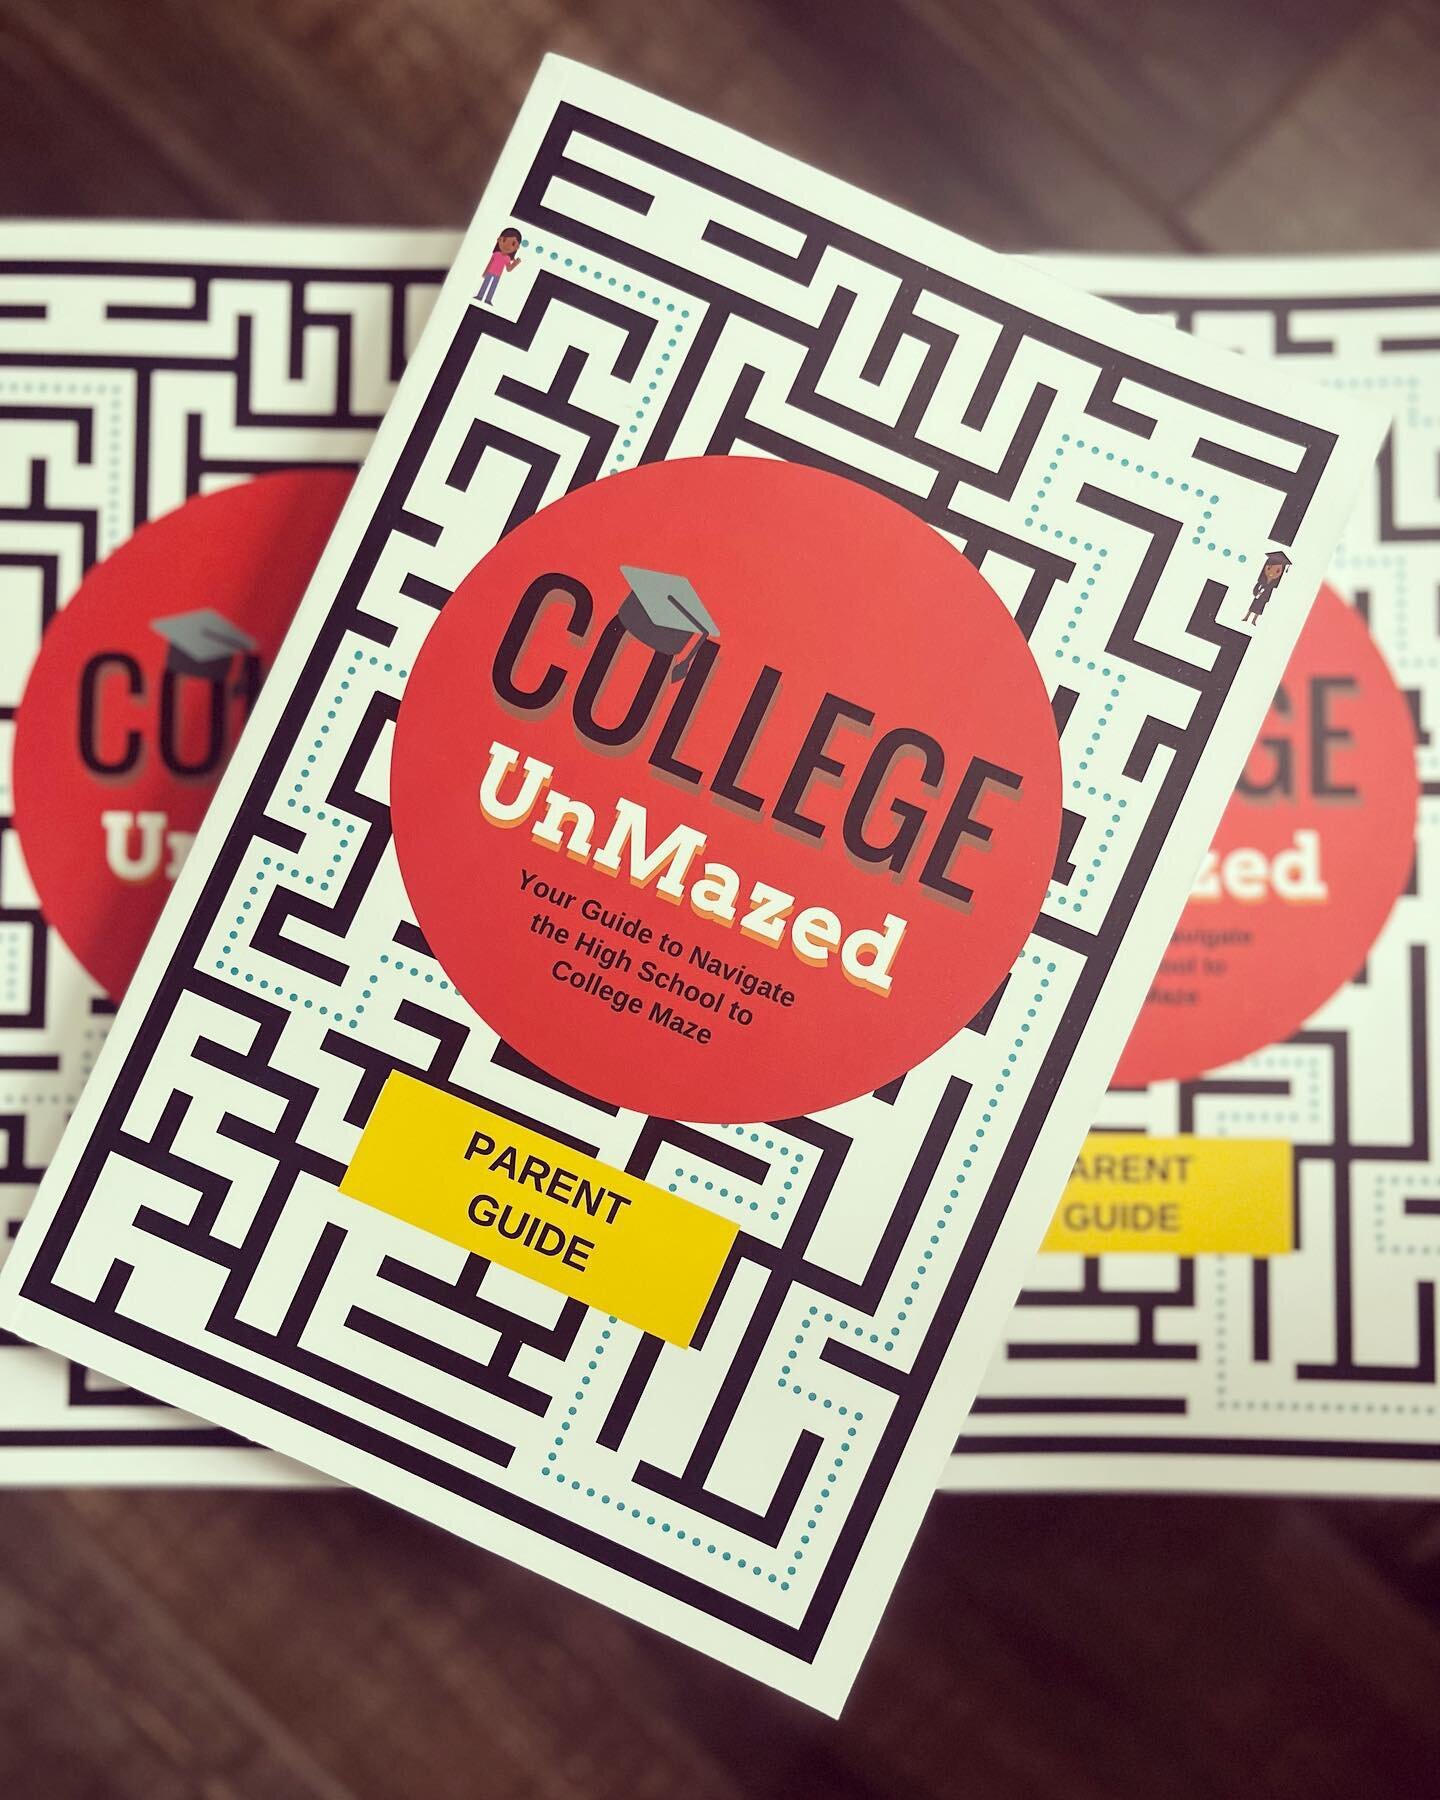 The College UnMazed Parent Guide just officially landed! So excited for this amazing supplemental resource to help families navigate the high school to college process! We believe this process needs to a comprehensive, holistic approach for families 